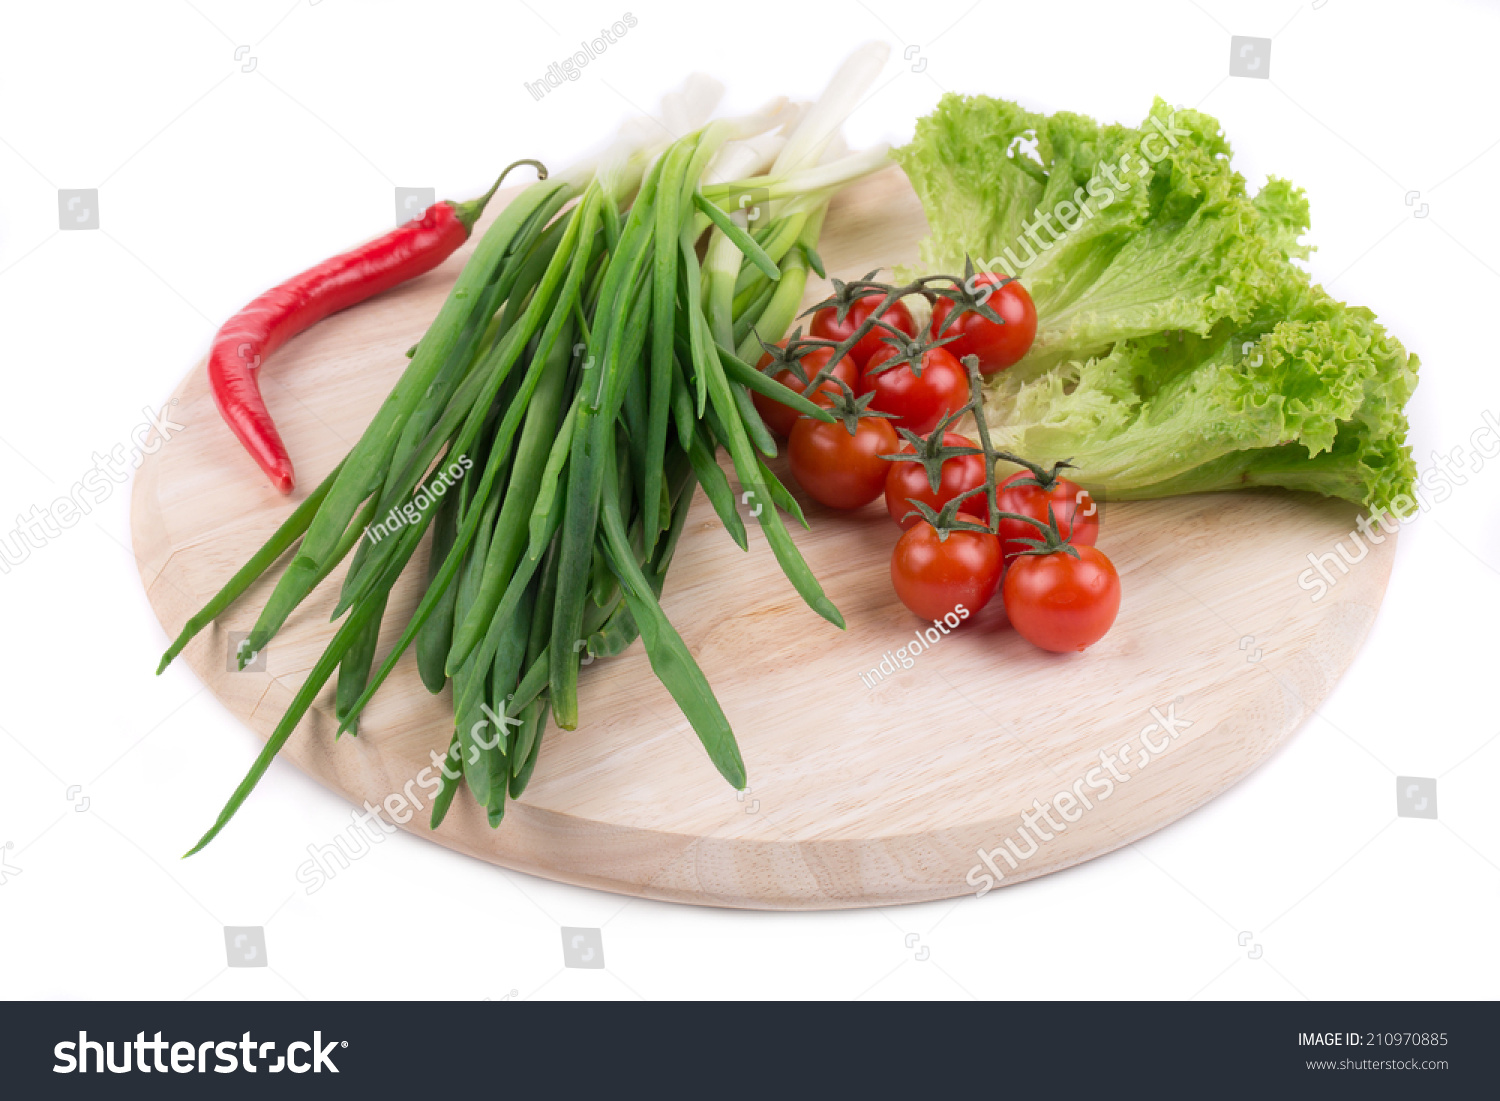 Onions and cherry tomatoes on a wooden board. #210970885